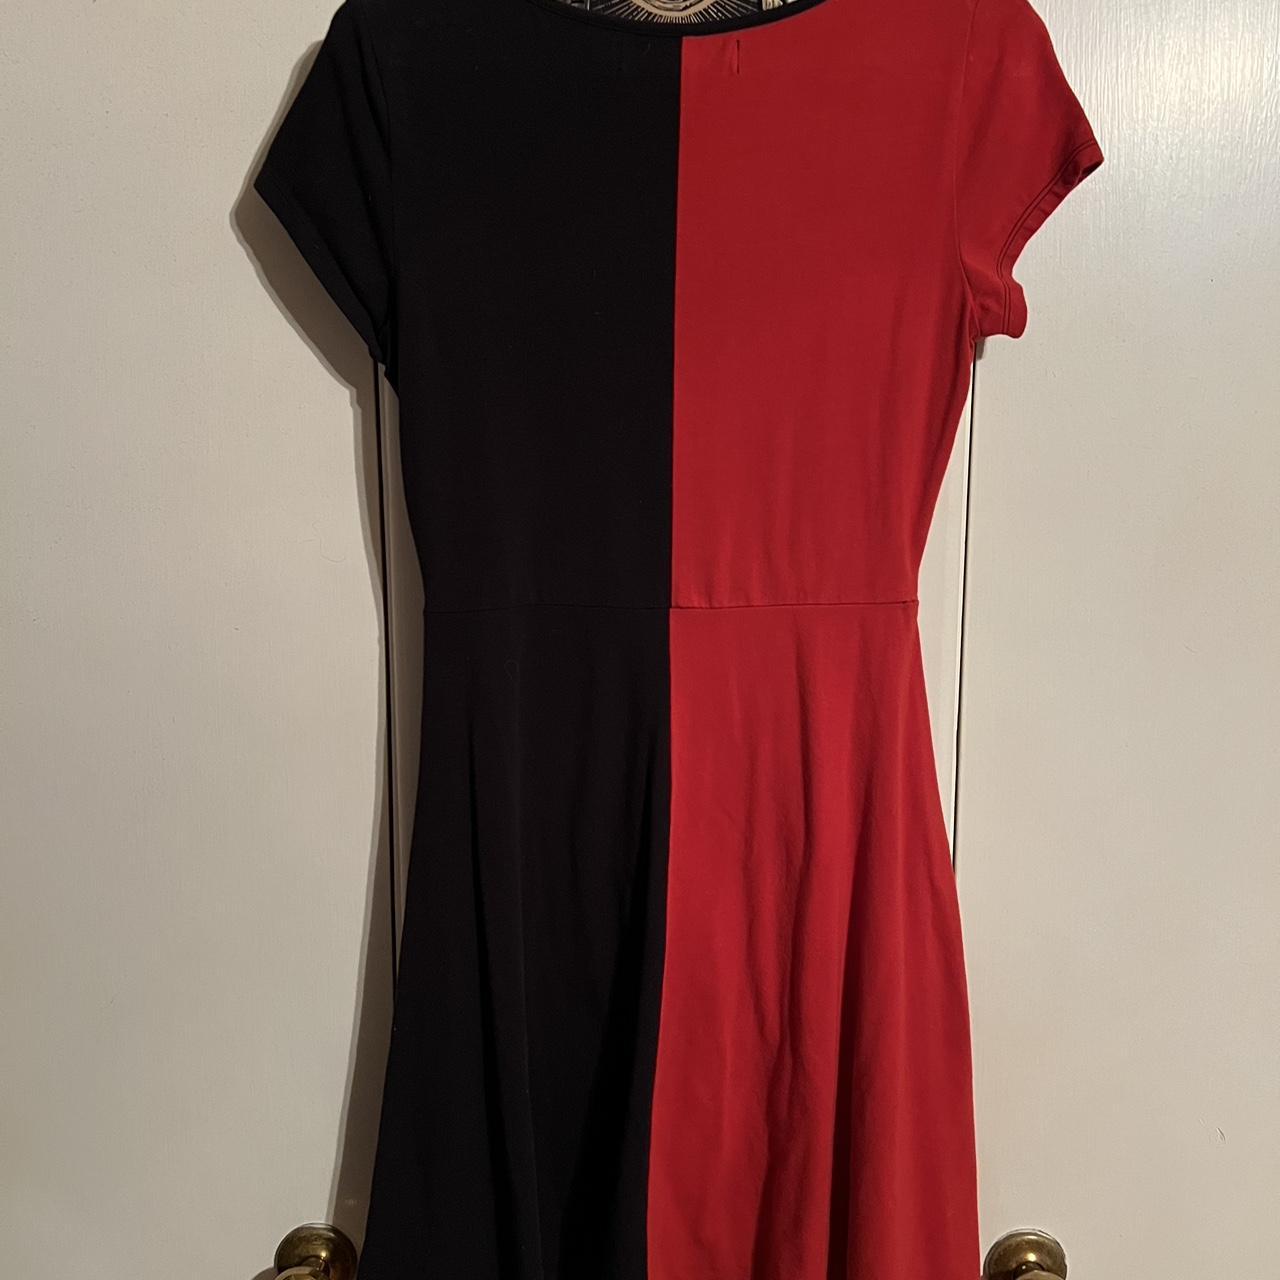 Iron Fist Women's Black and Red Dress (2)